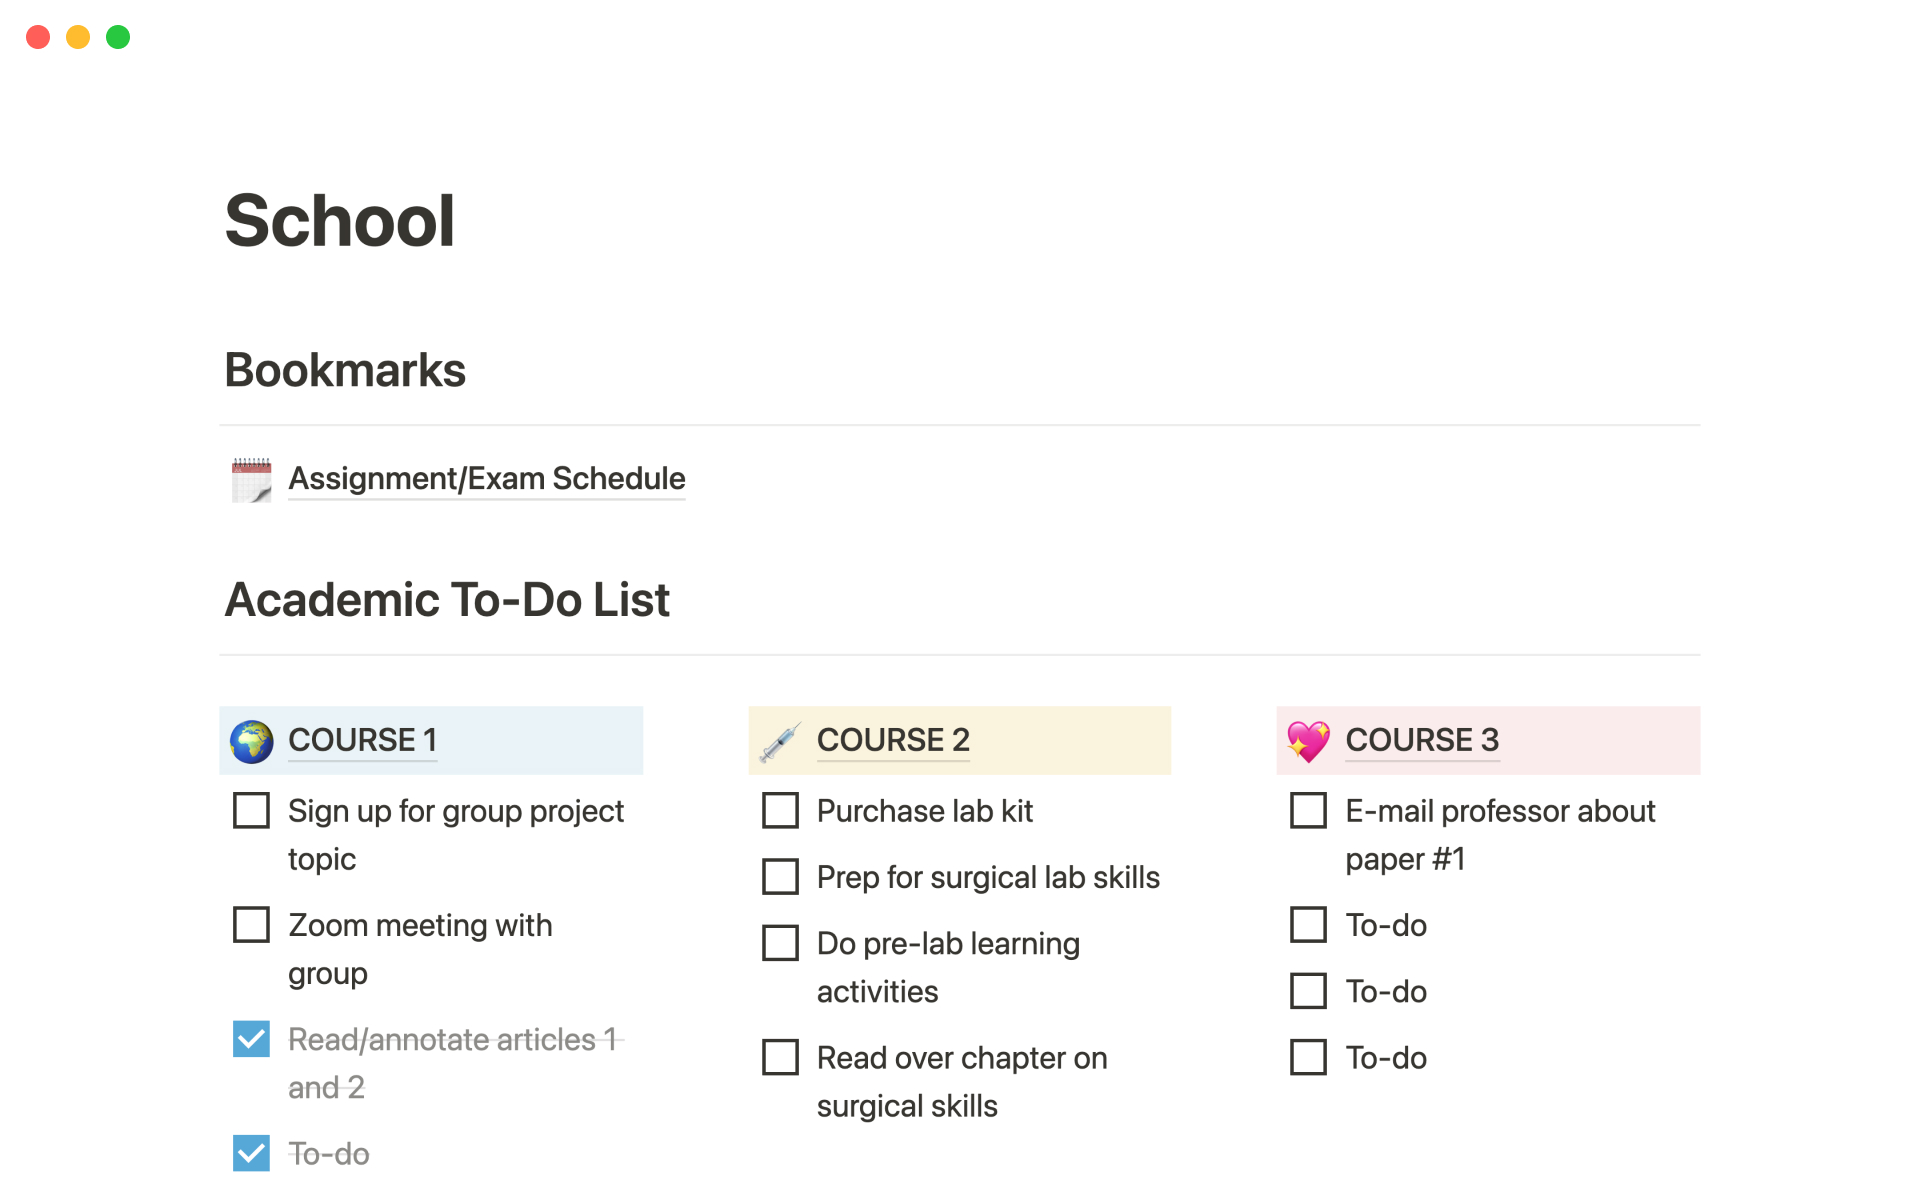 Plan, organize and track all your school activities.